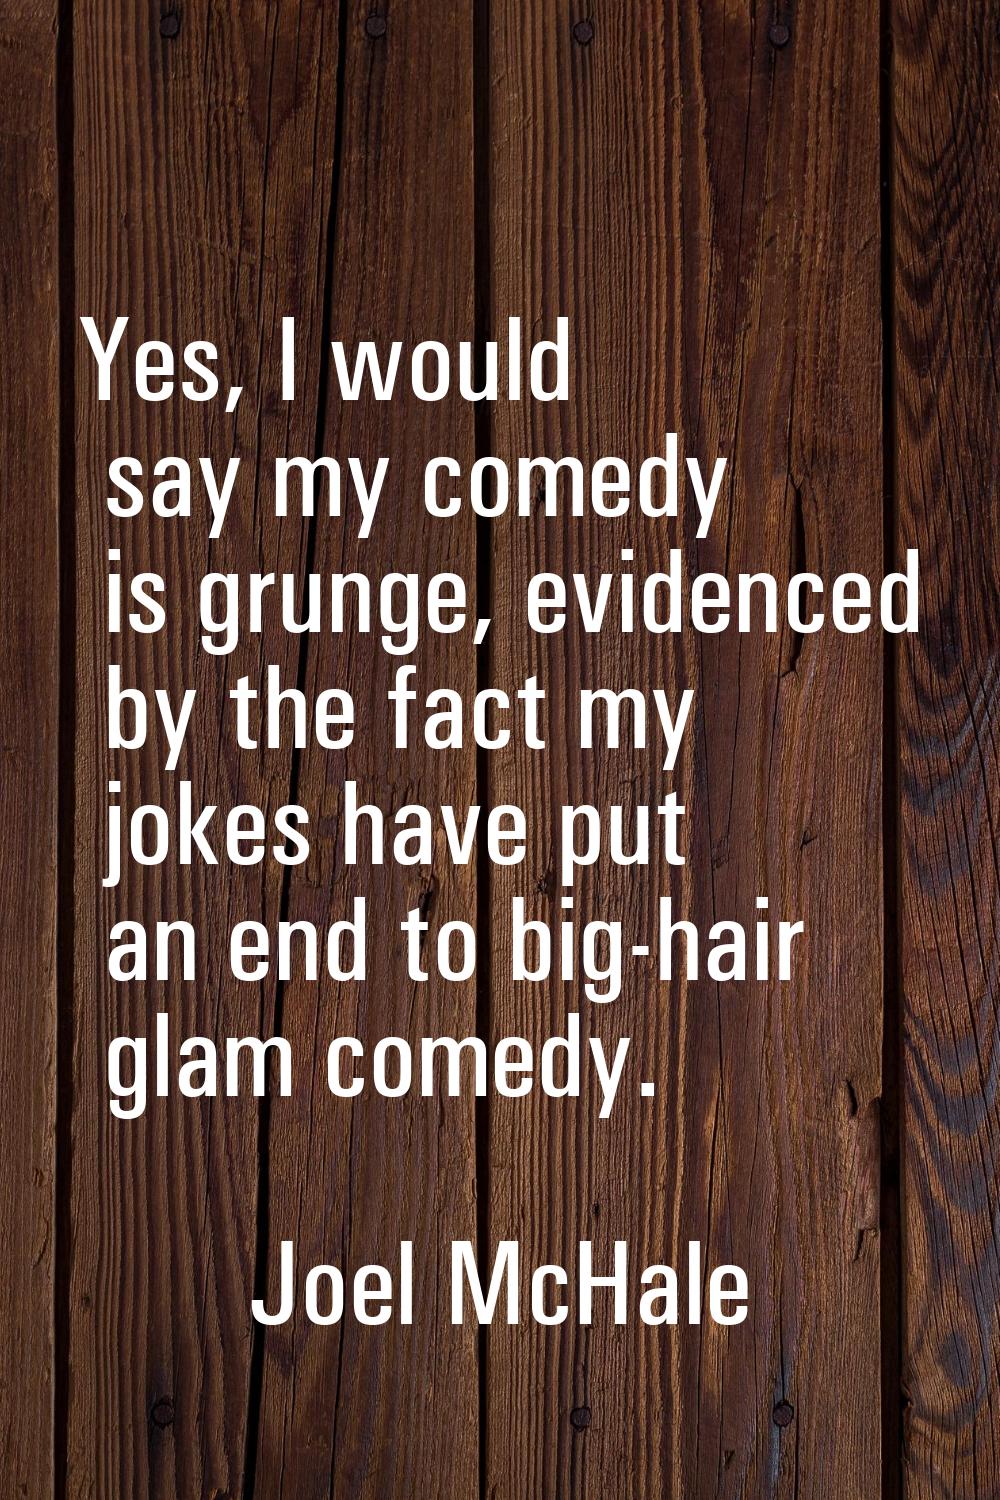 Yes, I would say my comedy is grunge, evidenced by the fact my jokes have put an end to big-hair gl